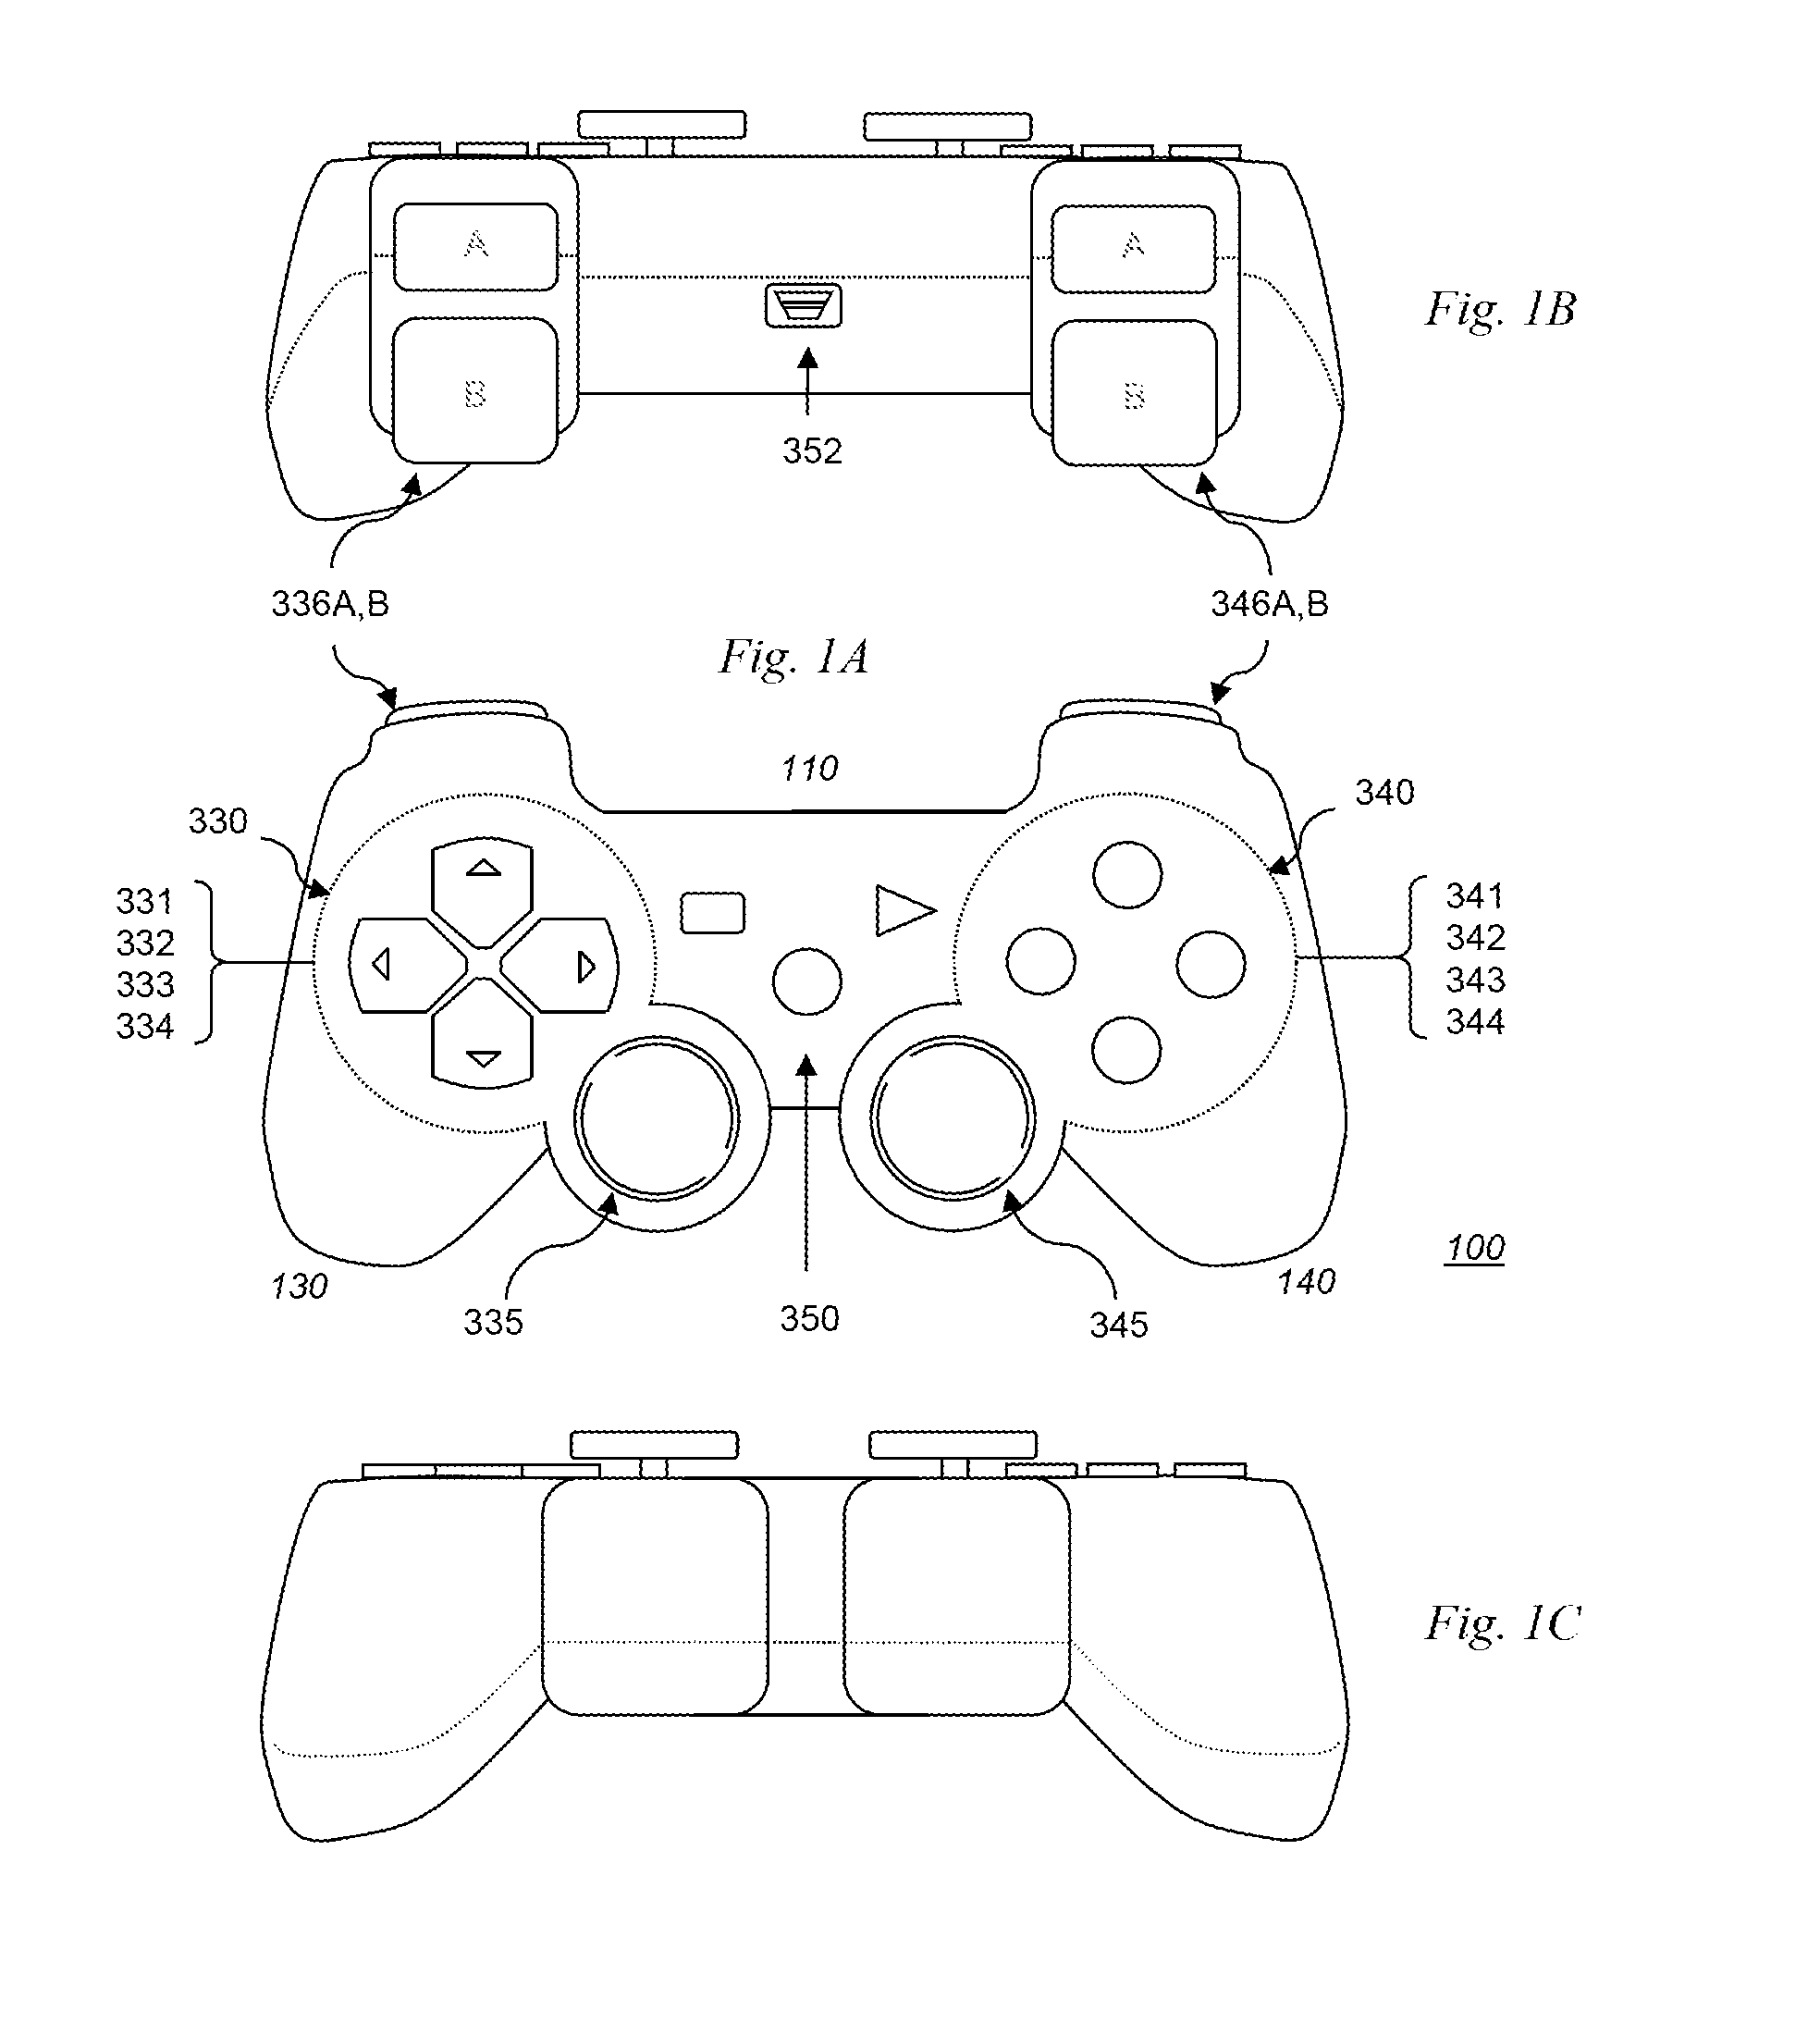 Peripheral apparatus and method of construction